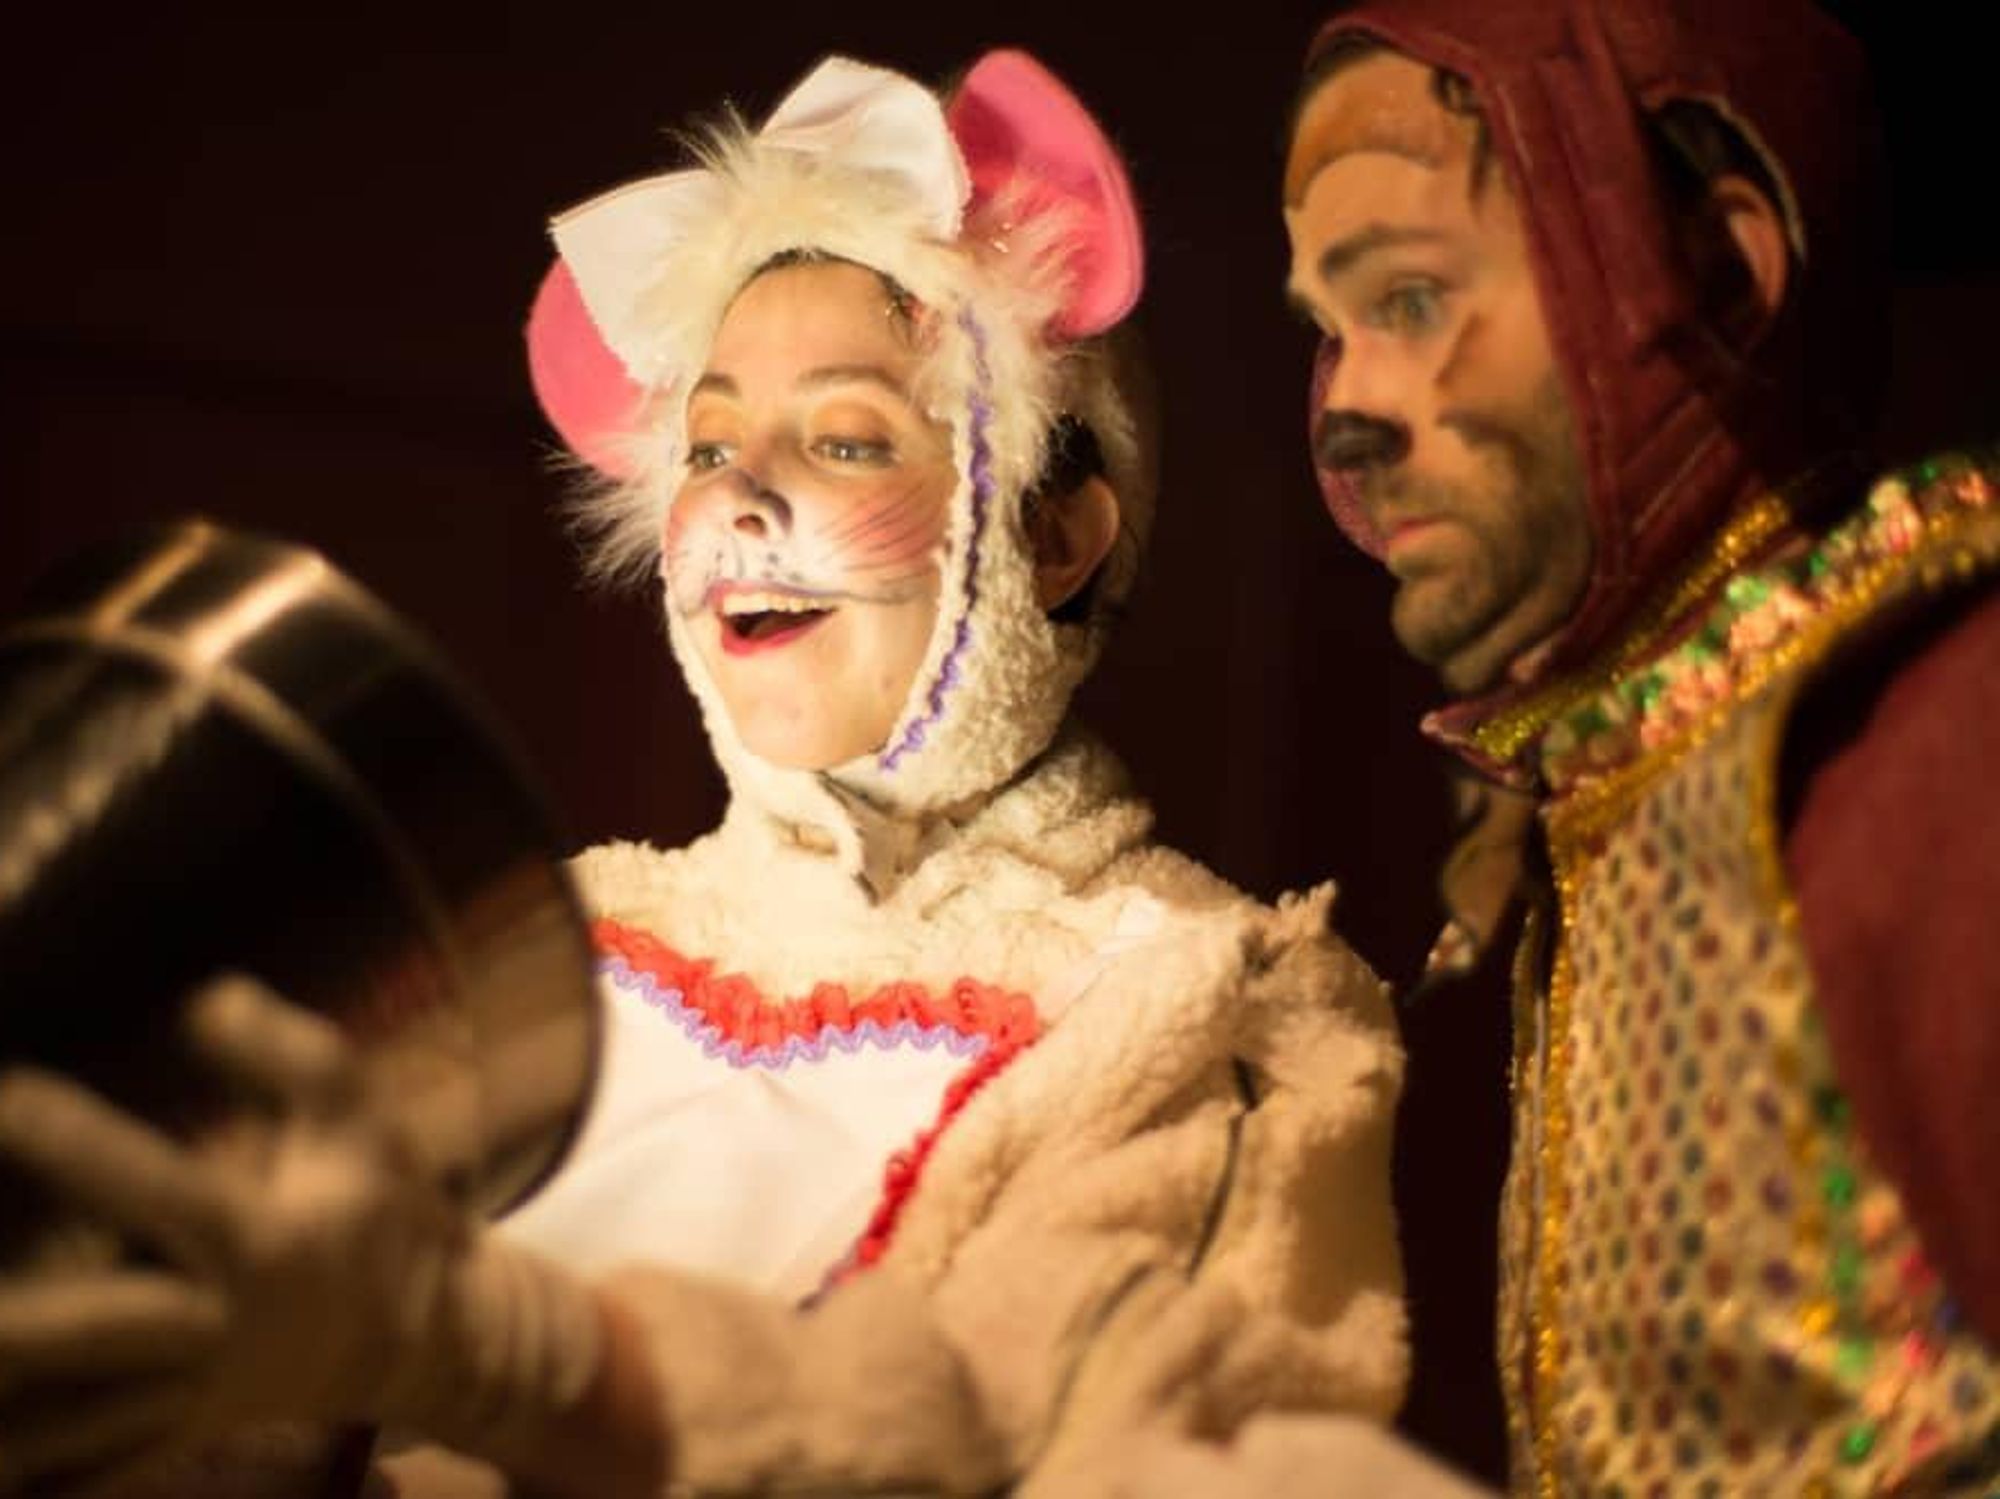 Mousey by Ochre House Theatre